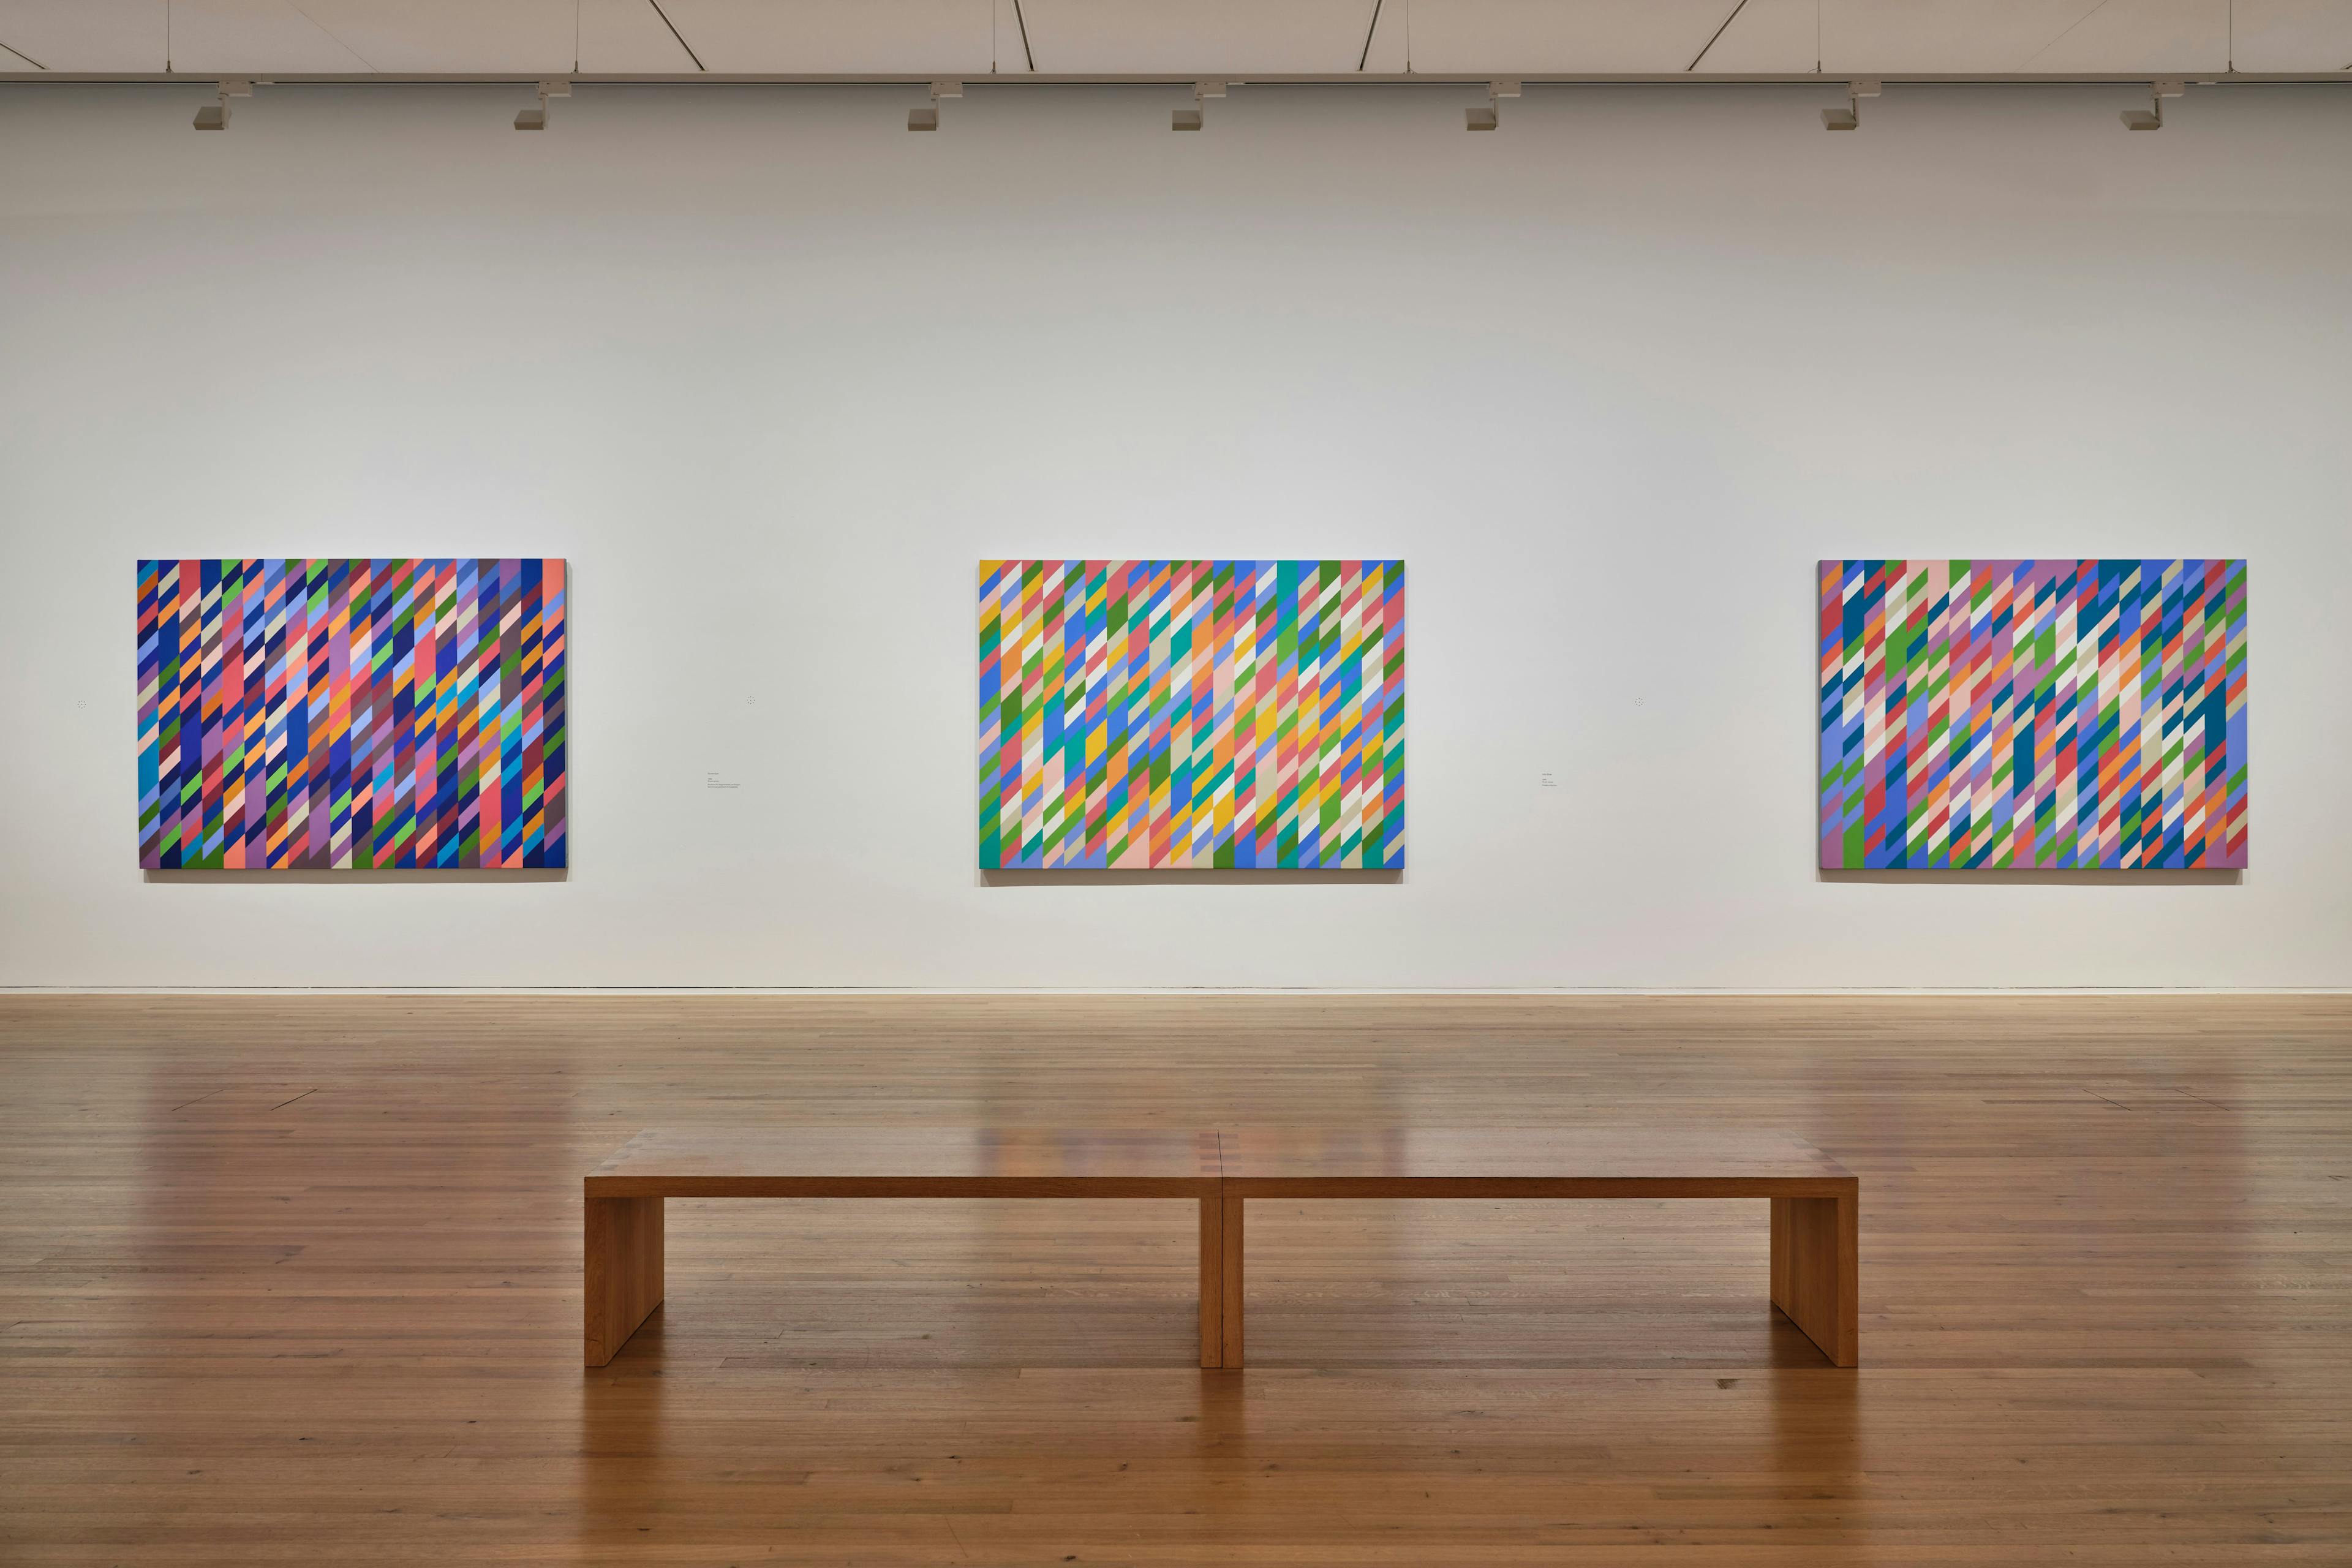 Installation view of the exhibition, Bridget Riley: Looking and Seeing, Doing and Making, at The Zentrum Paul Klee, in Bern, Switzerland, dated 2022.